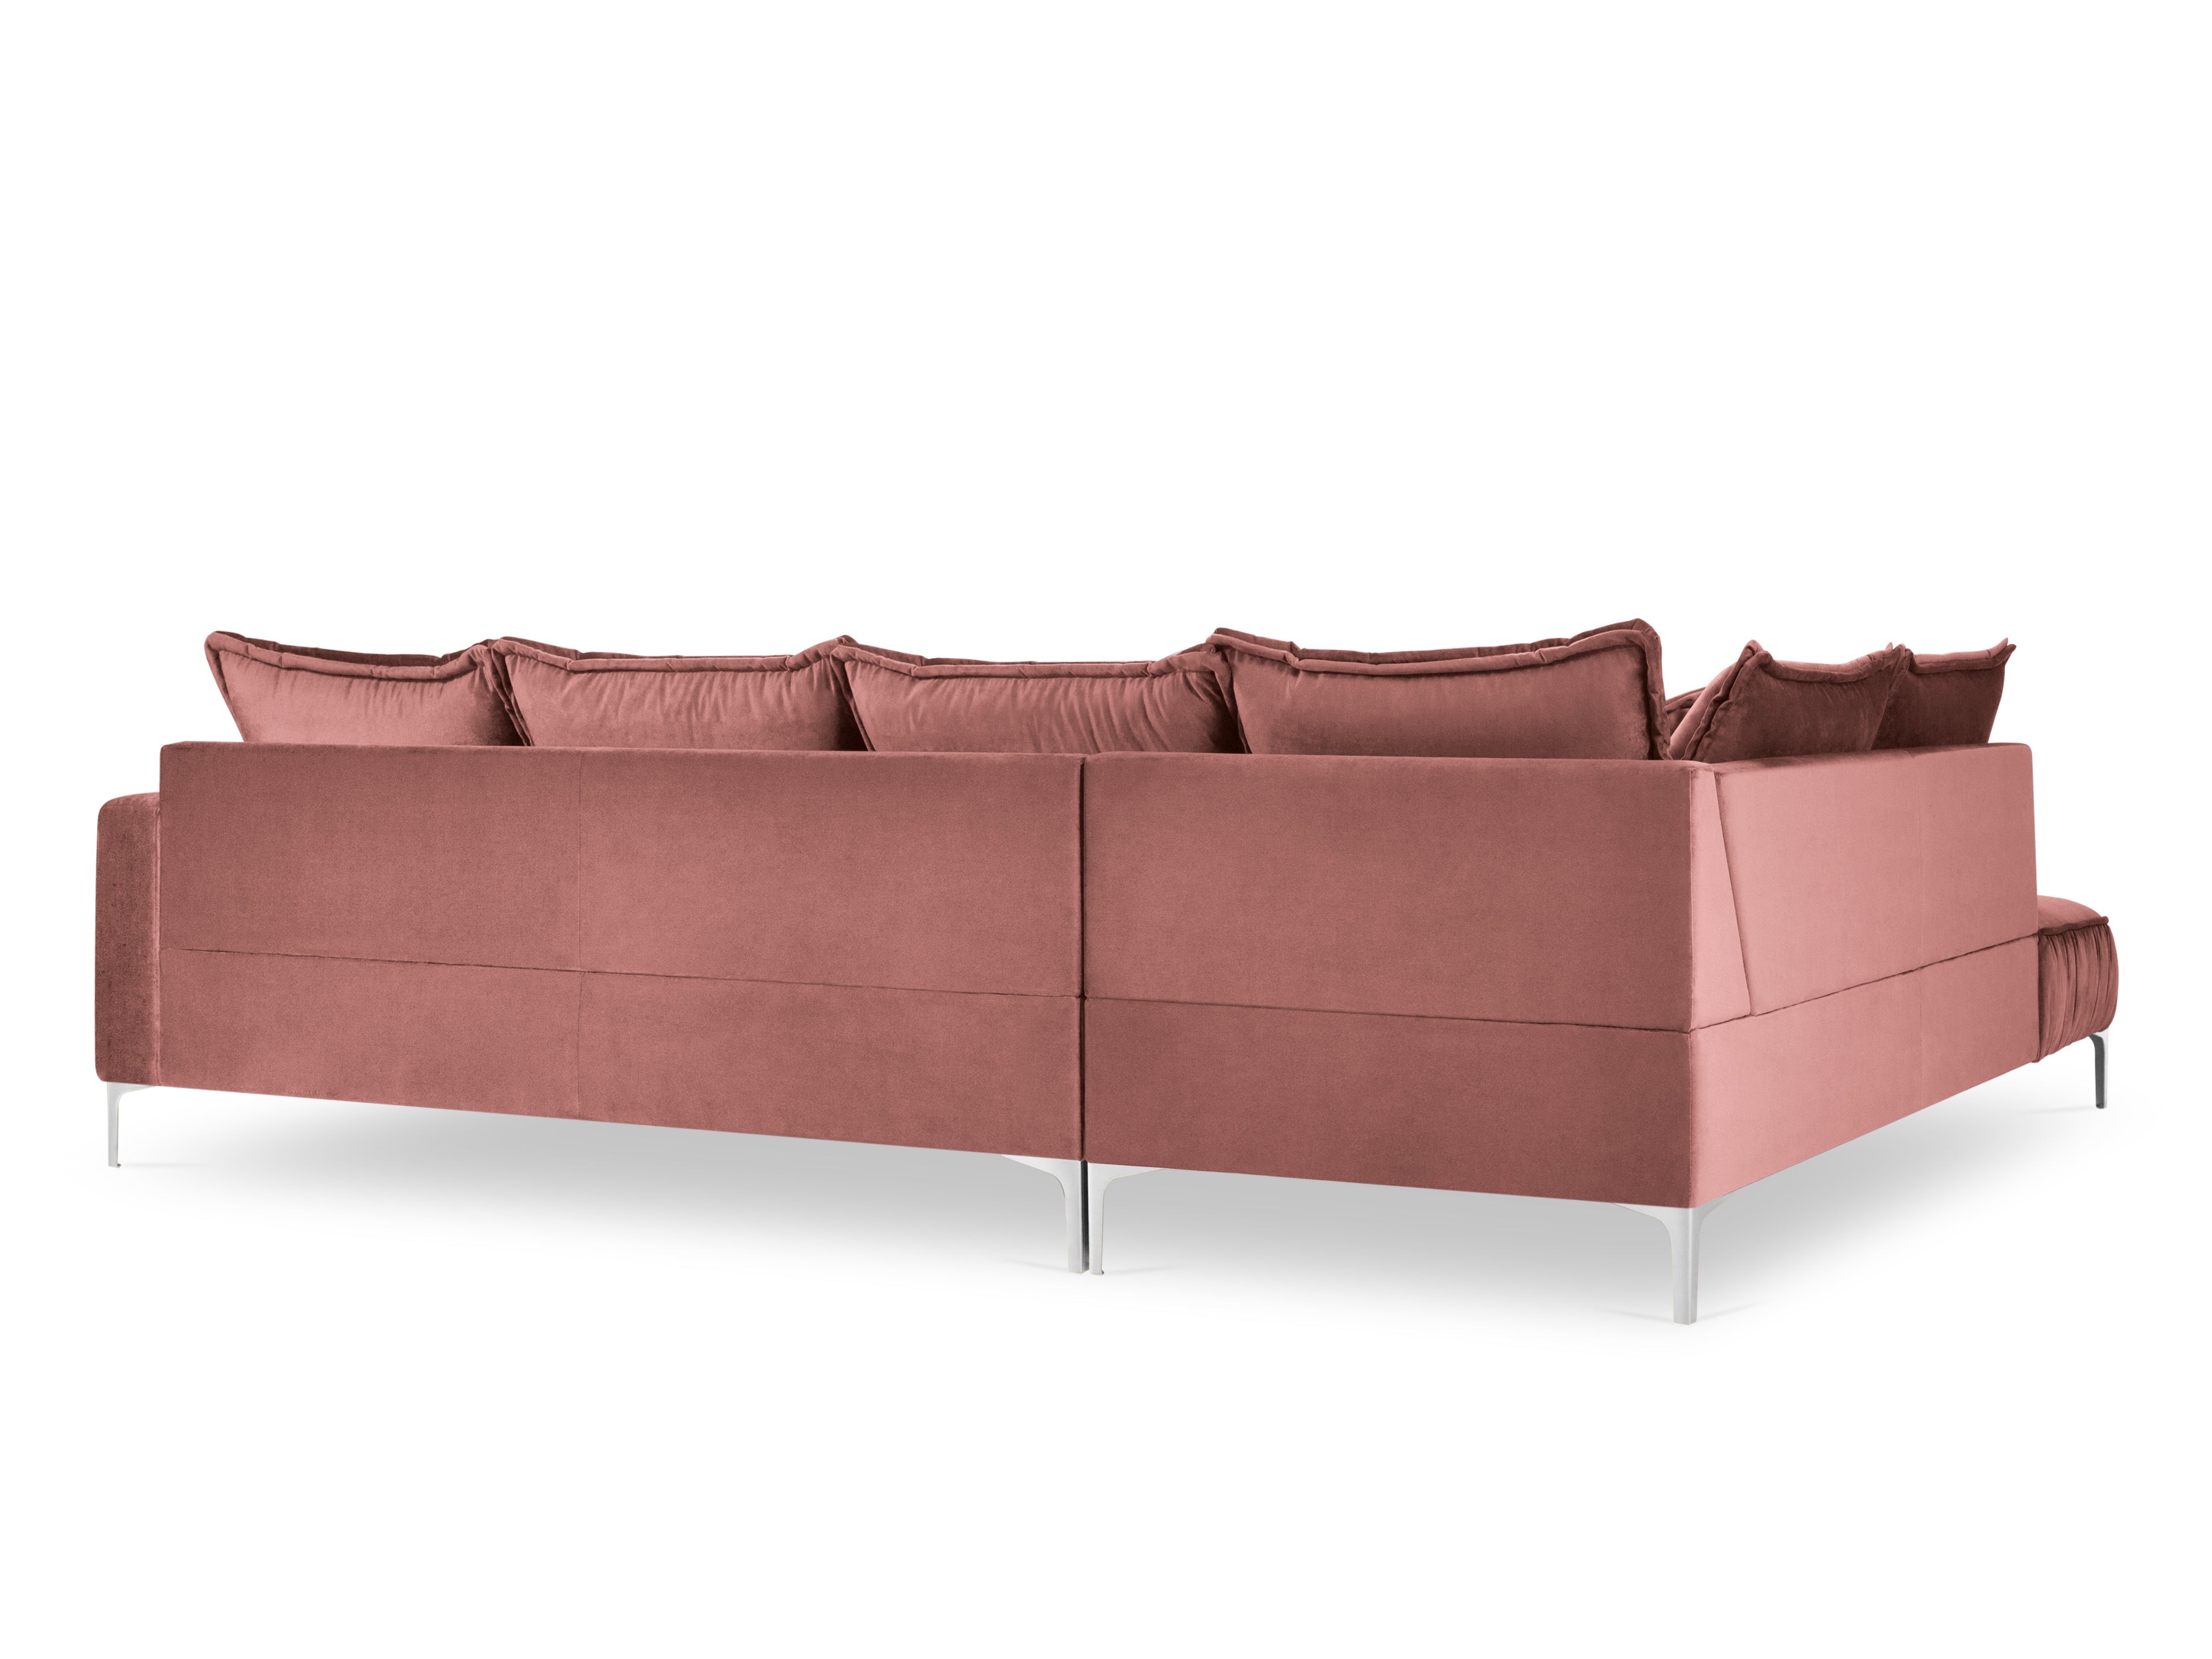 Corner with pink cushions